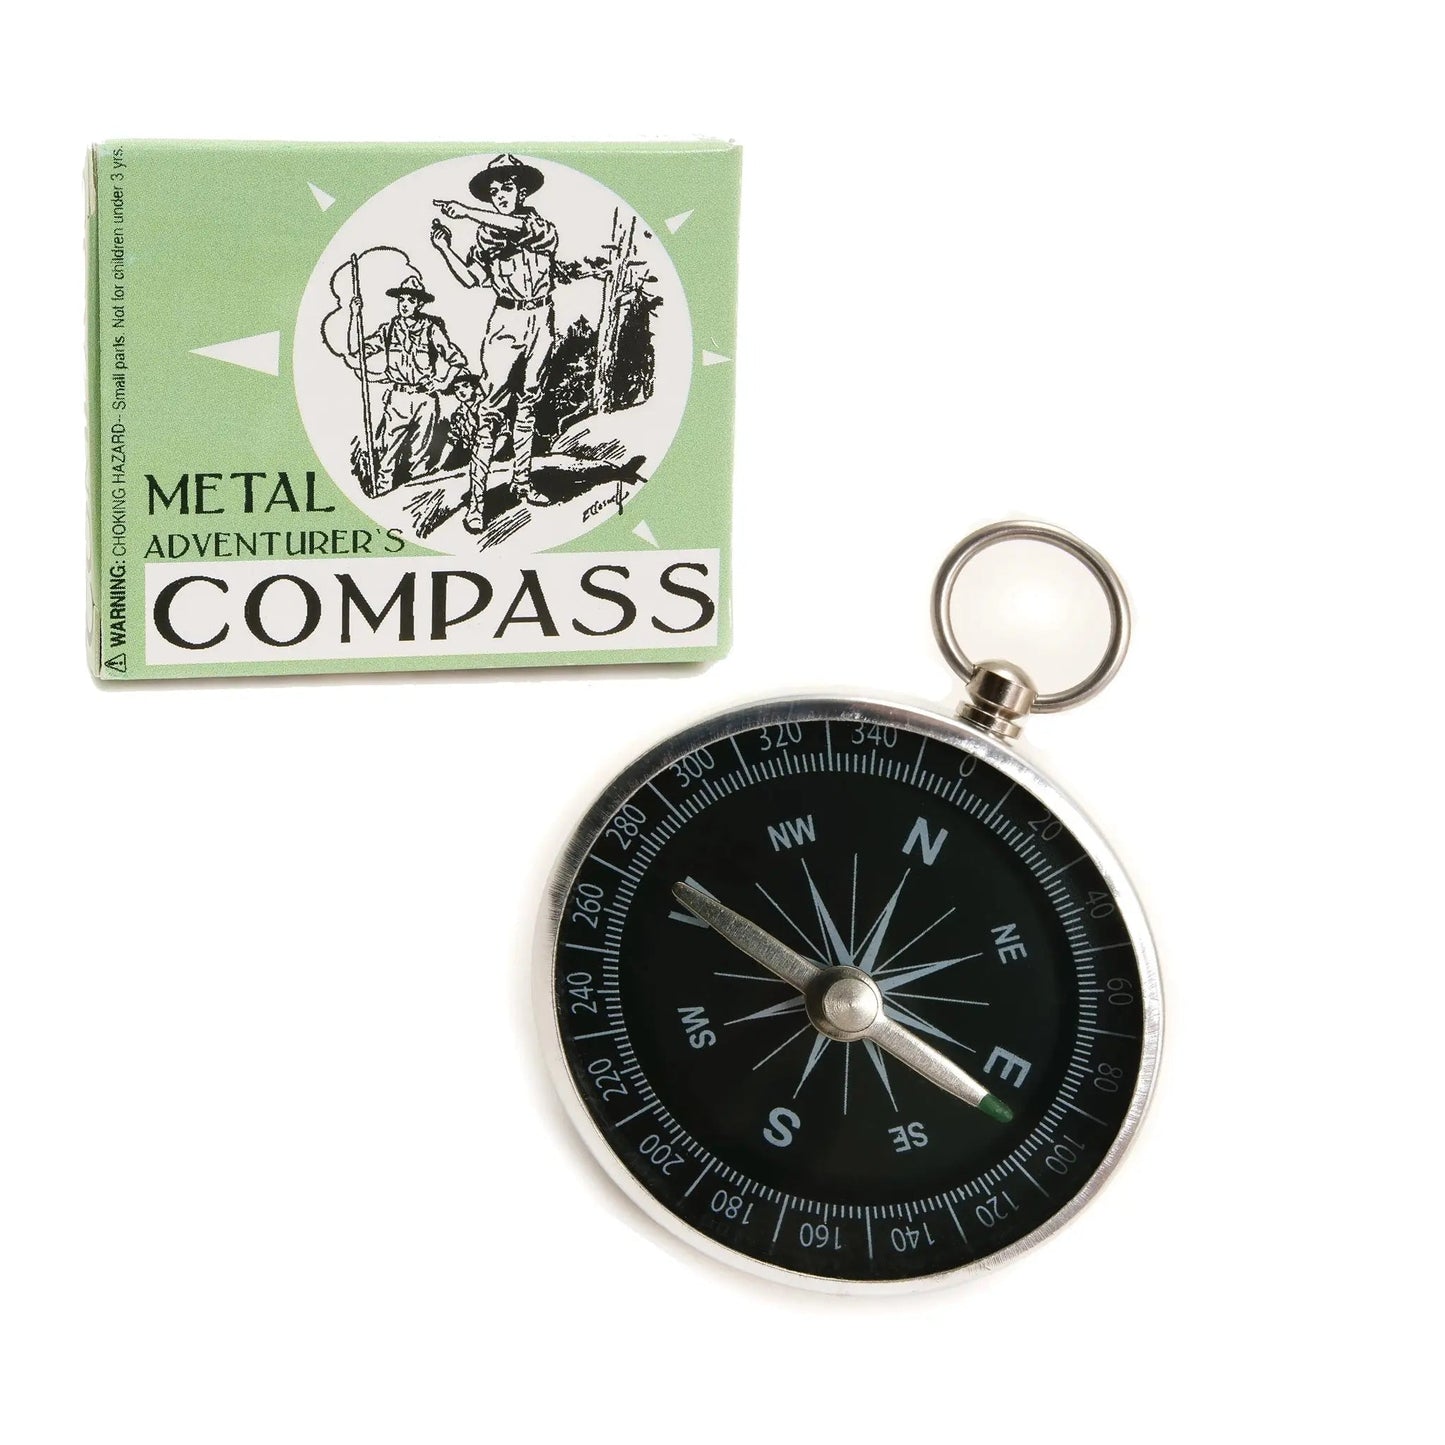 Adventurer's Compass - House of Marbles - The Forgotten Toy Shop